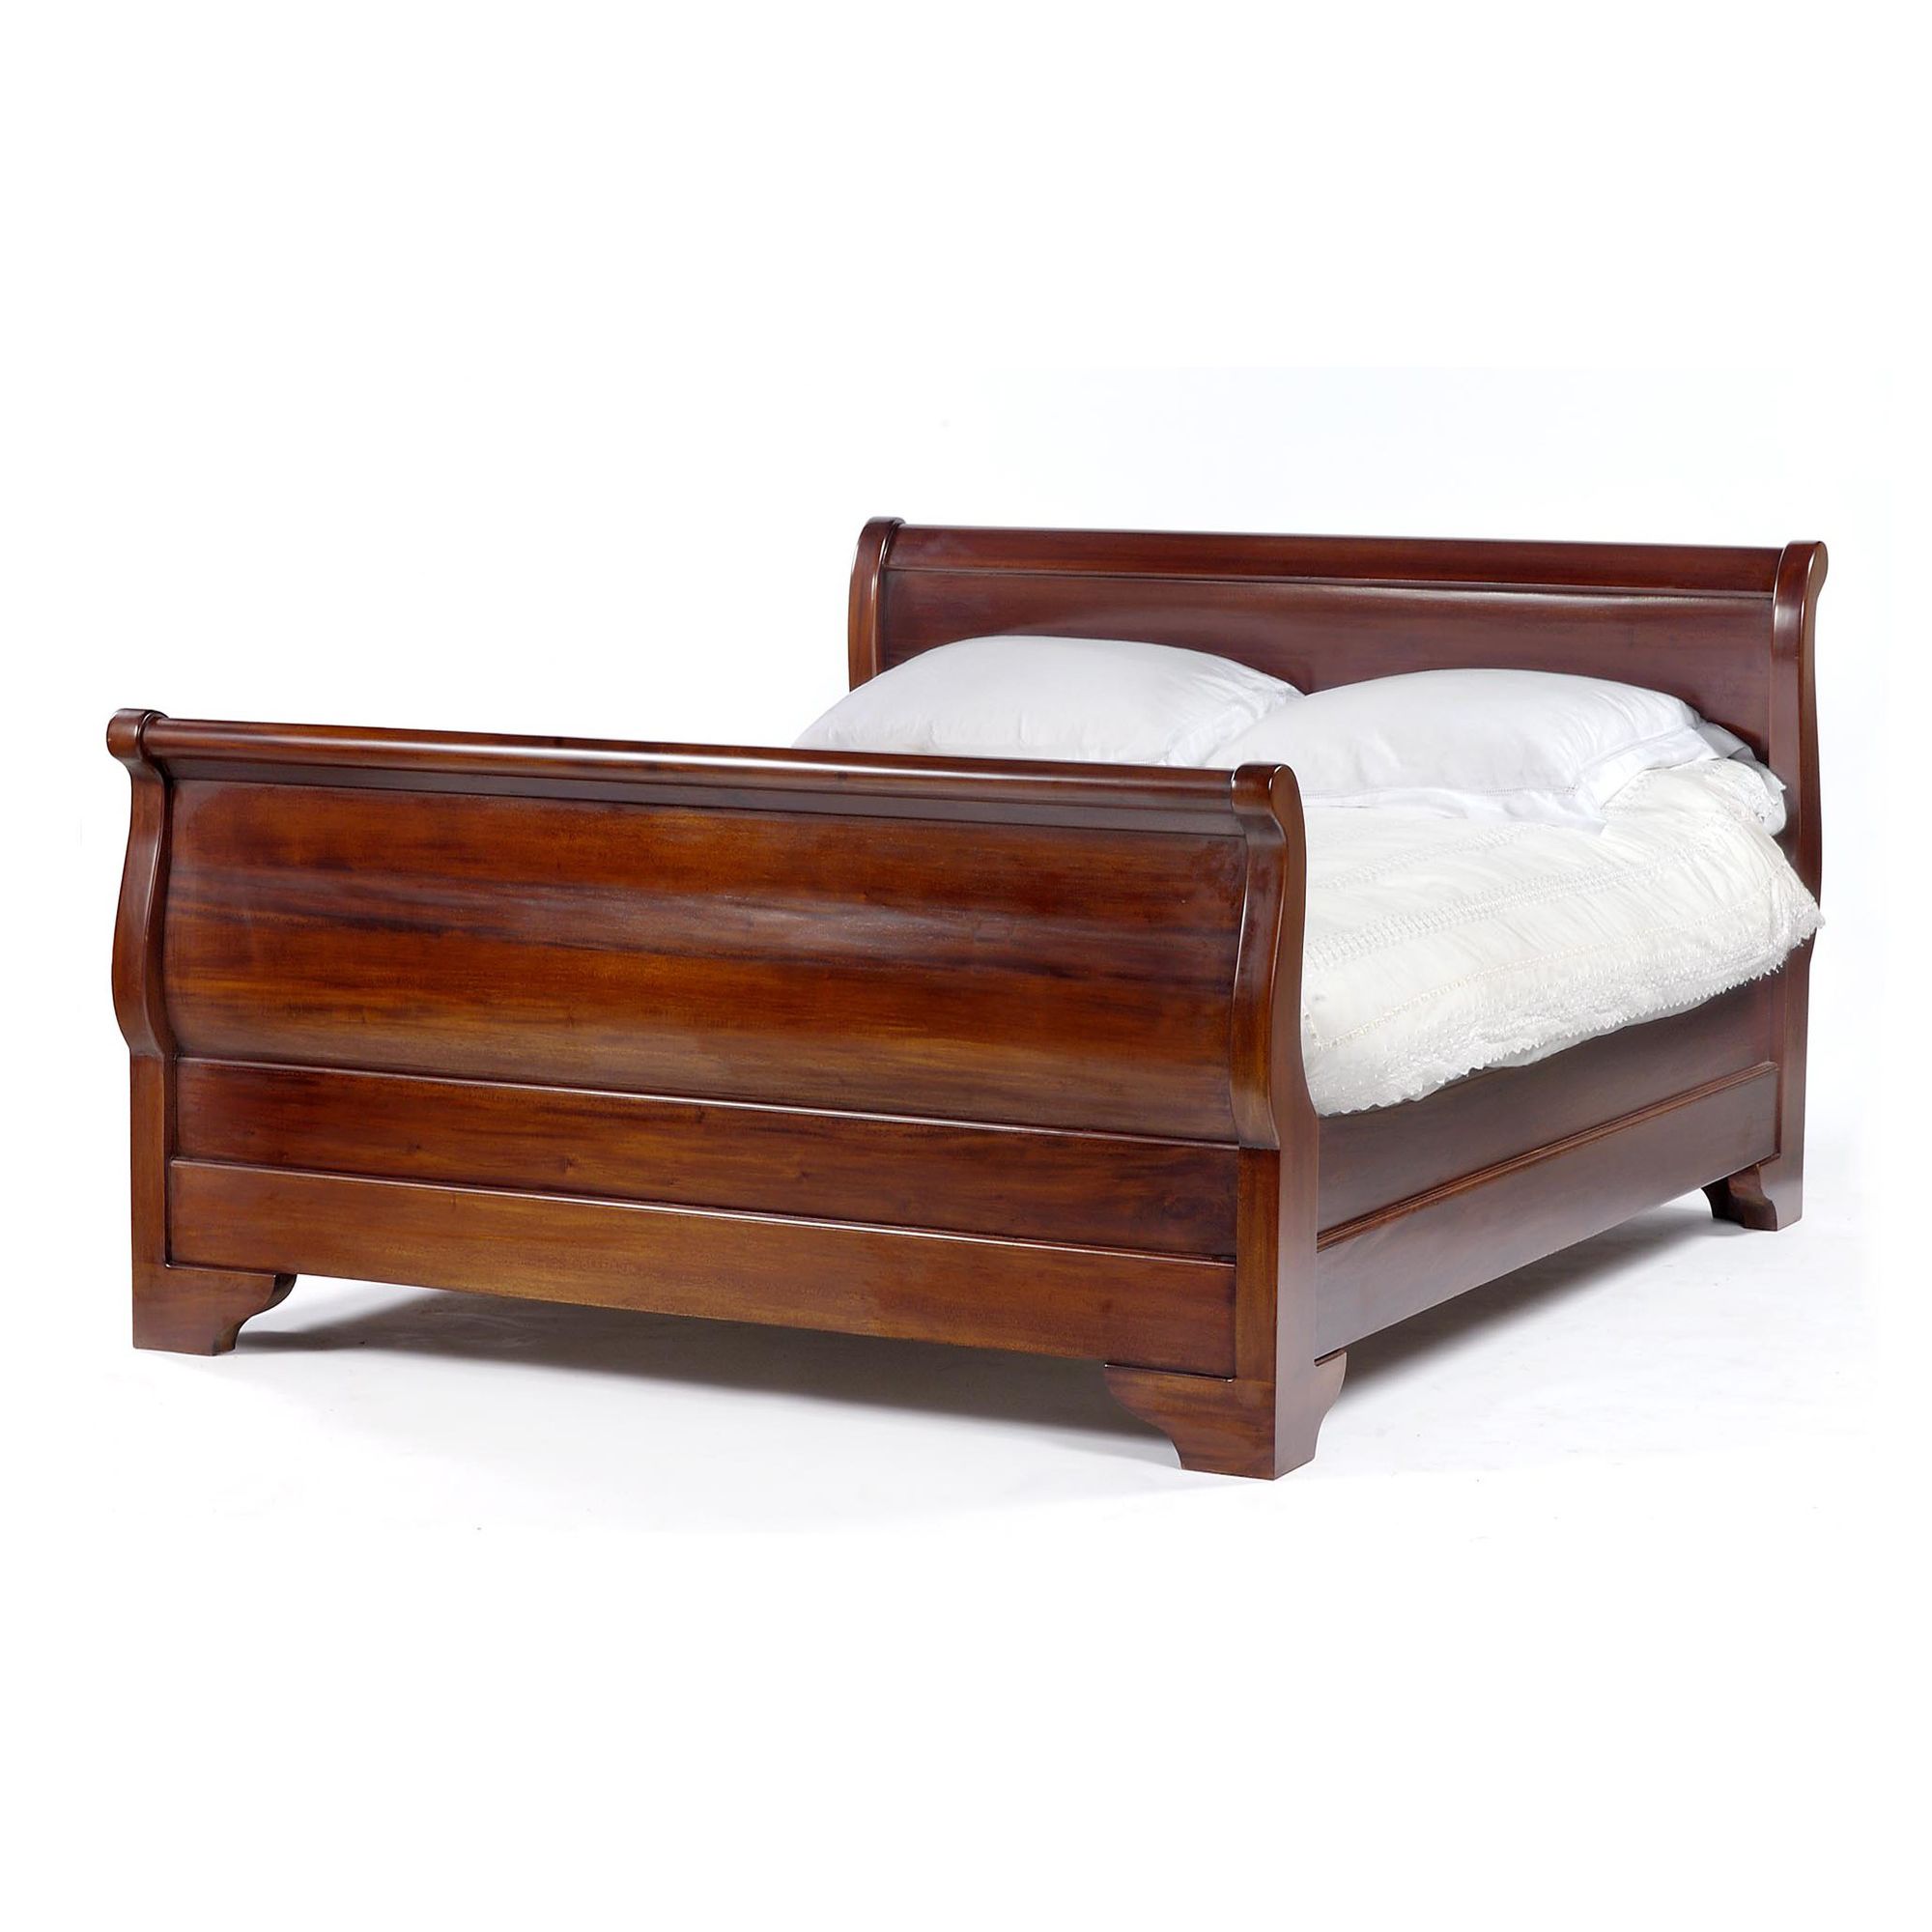 Anderson Bradshaw High-Back Sleigh Bed Frame - Super King at Tesco Direct